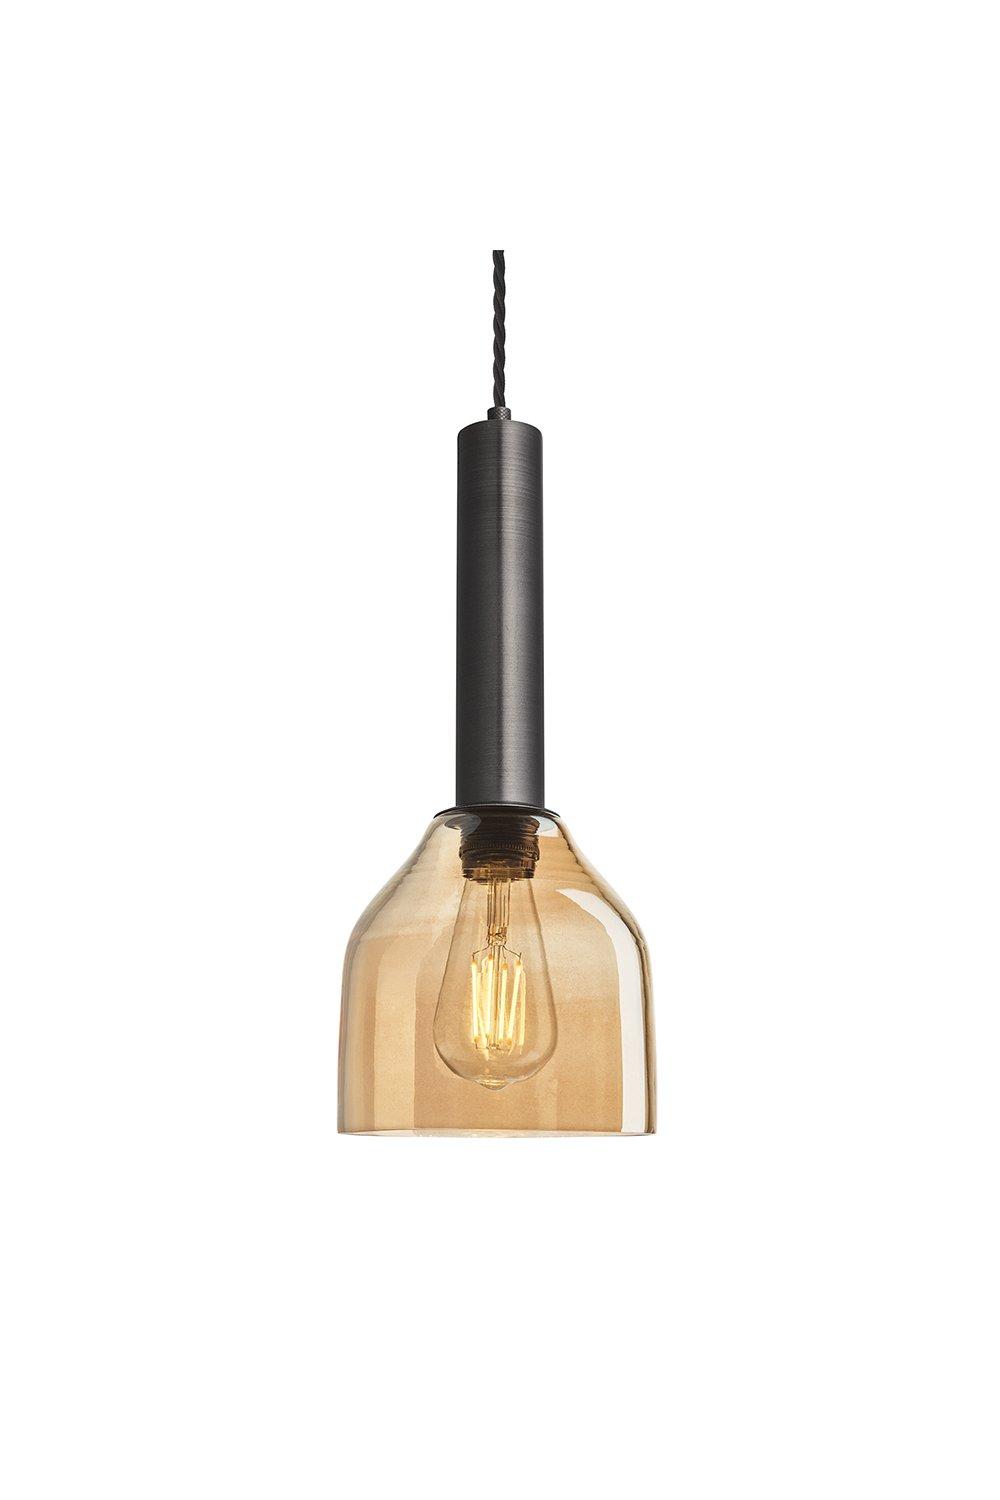 Sleek Cylinder Tinted Glass Cone Pendant Light, 6 Inch, Amber, Pewter Holder